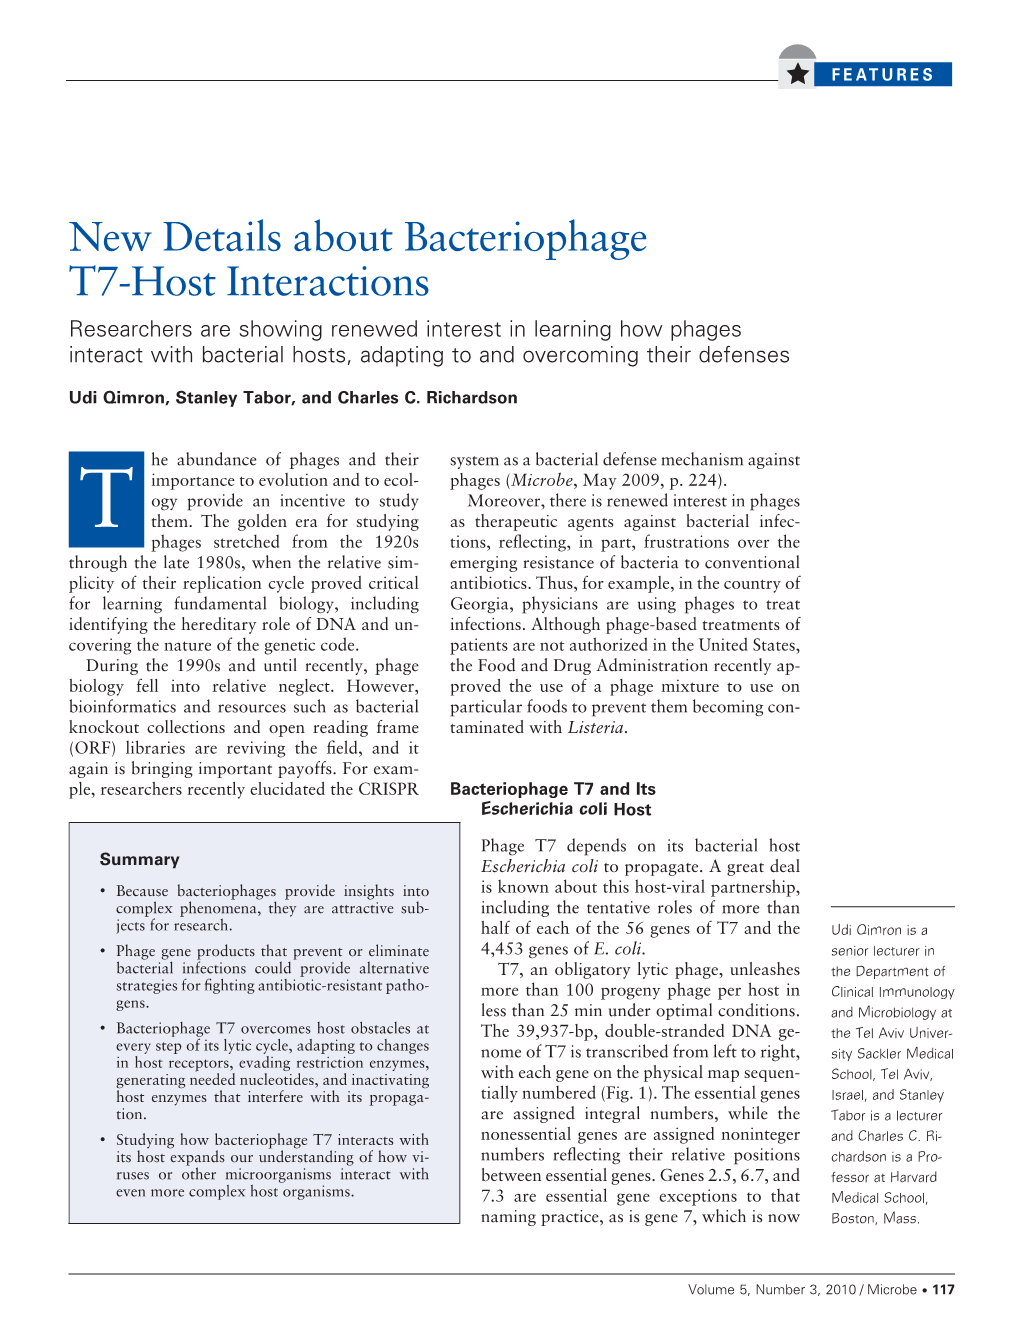 New Details About Bacteriophage T7-Host Interactions